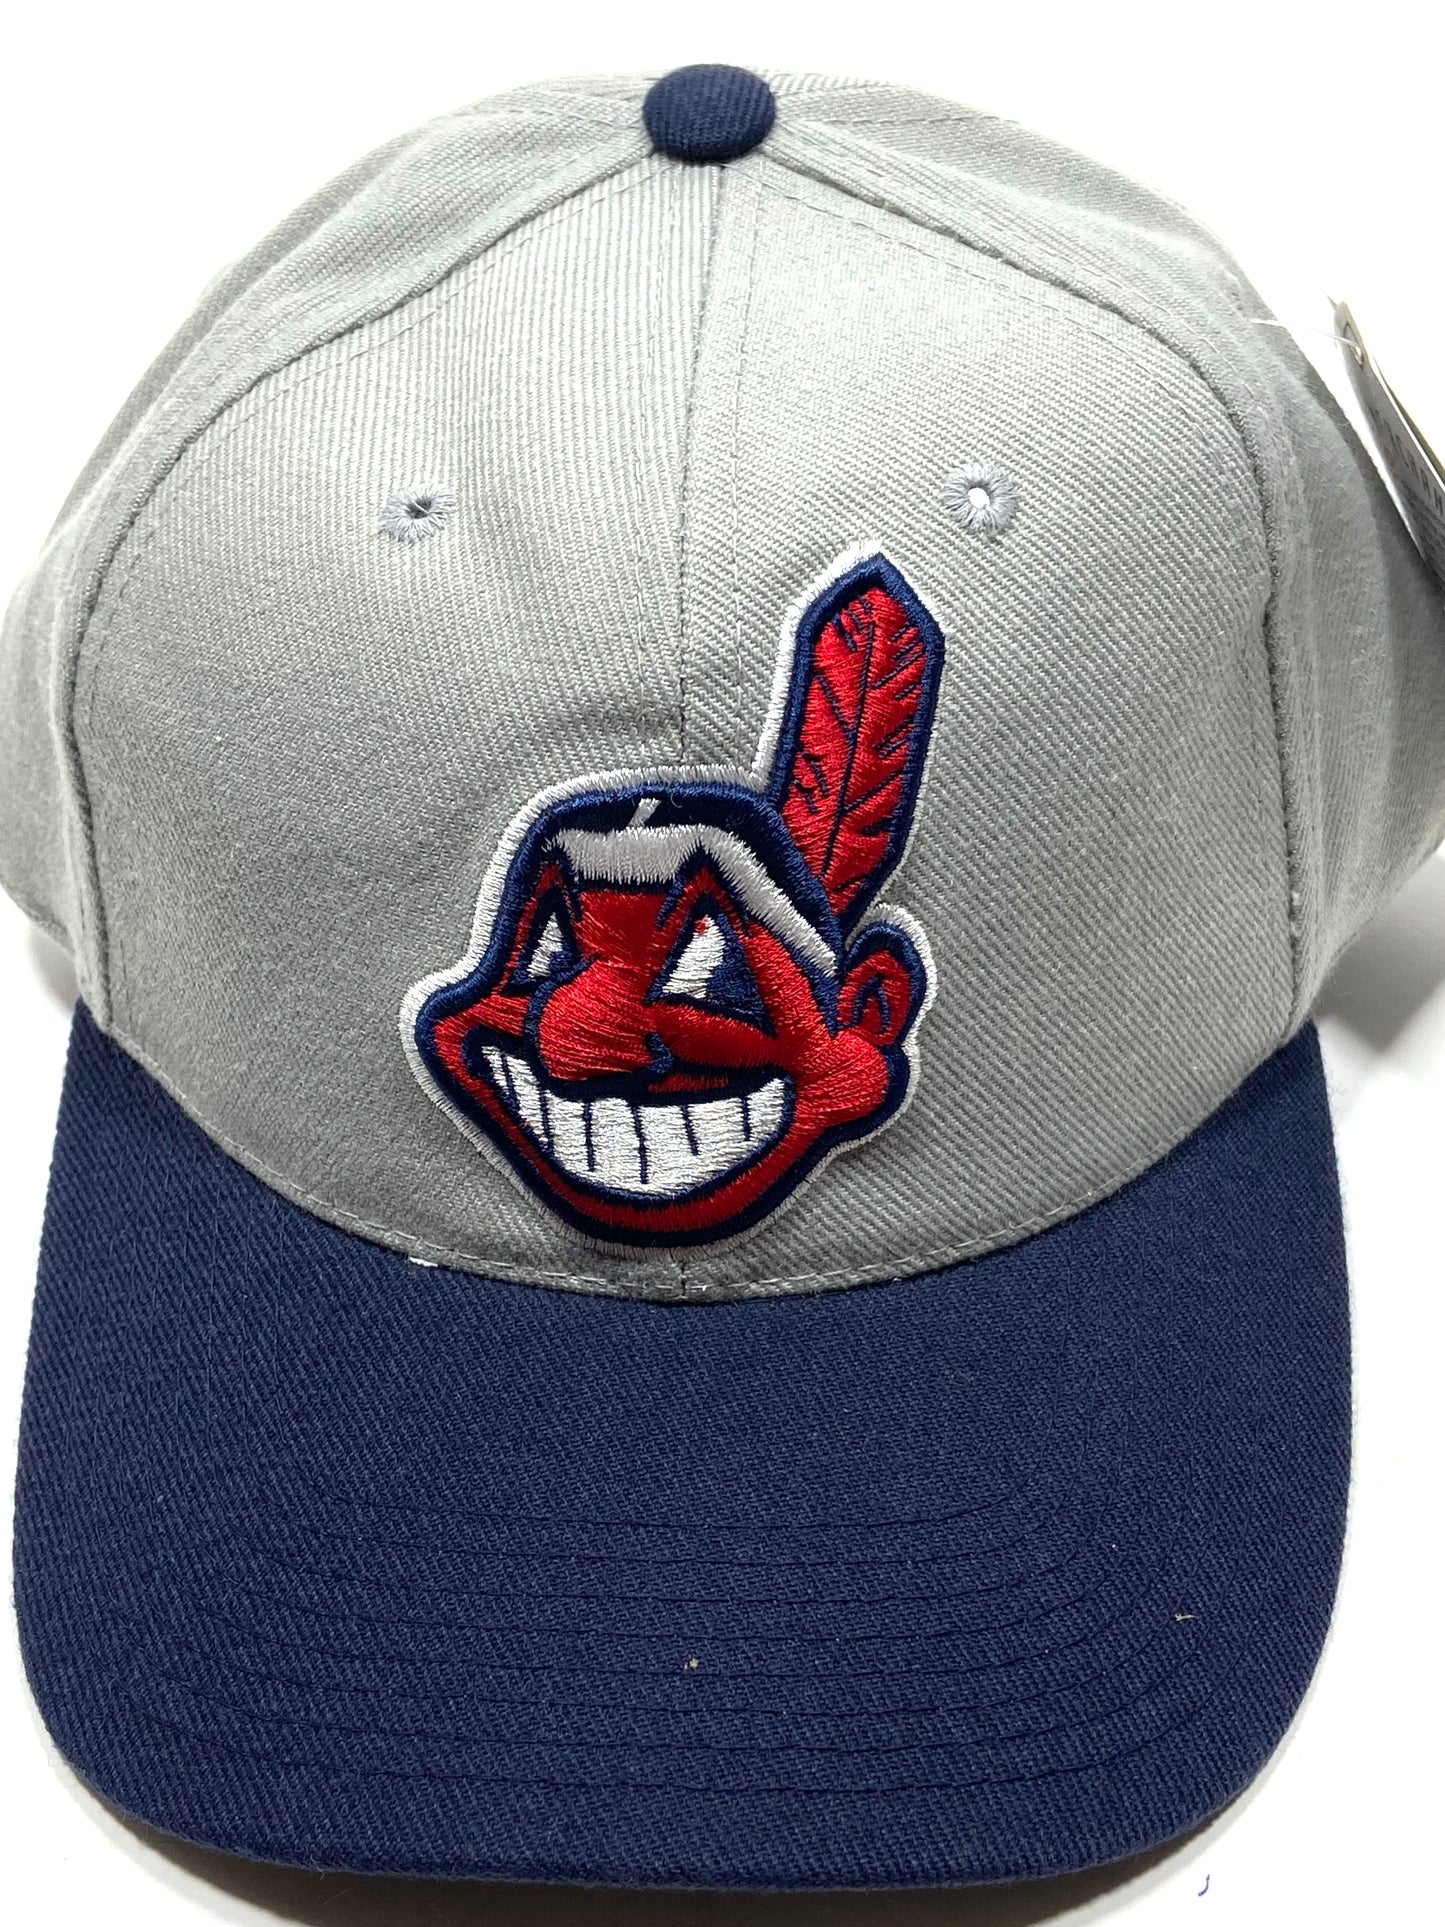 Cleveland Indians Vintage MLB Gray 20% Wool Cap by Sports Specialties